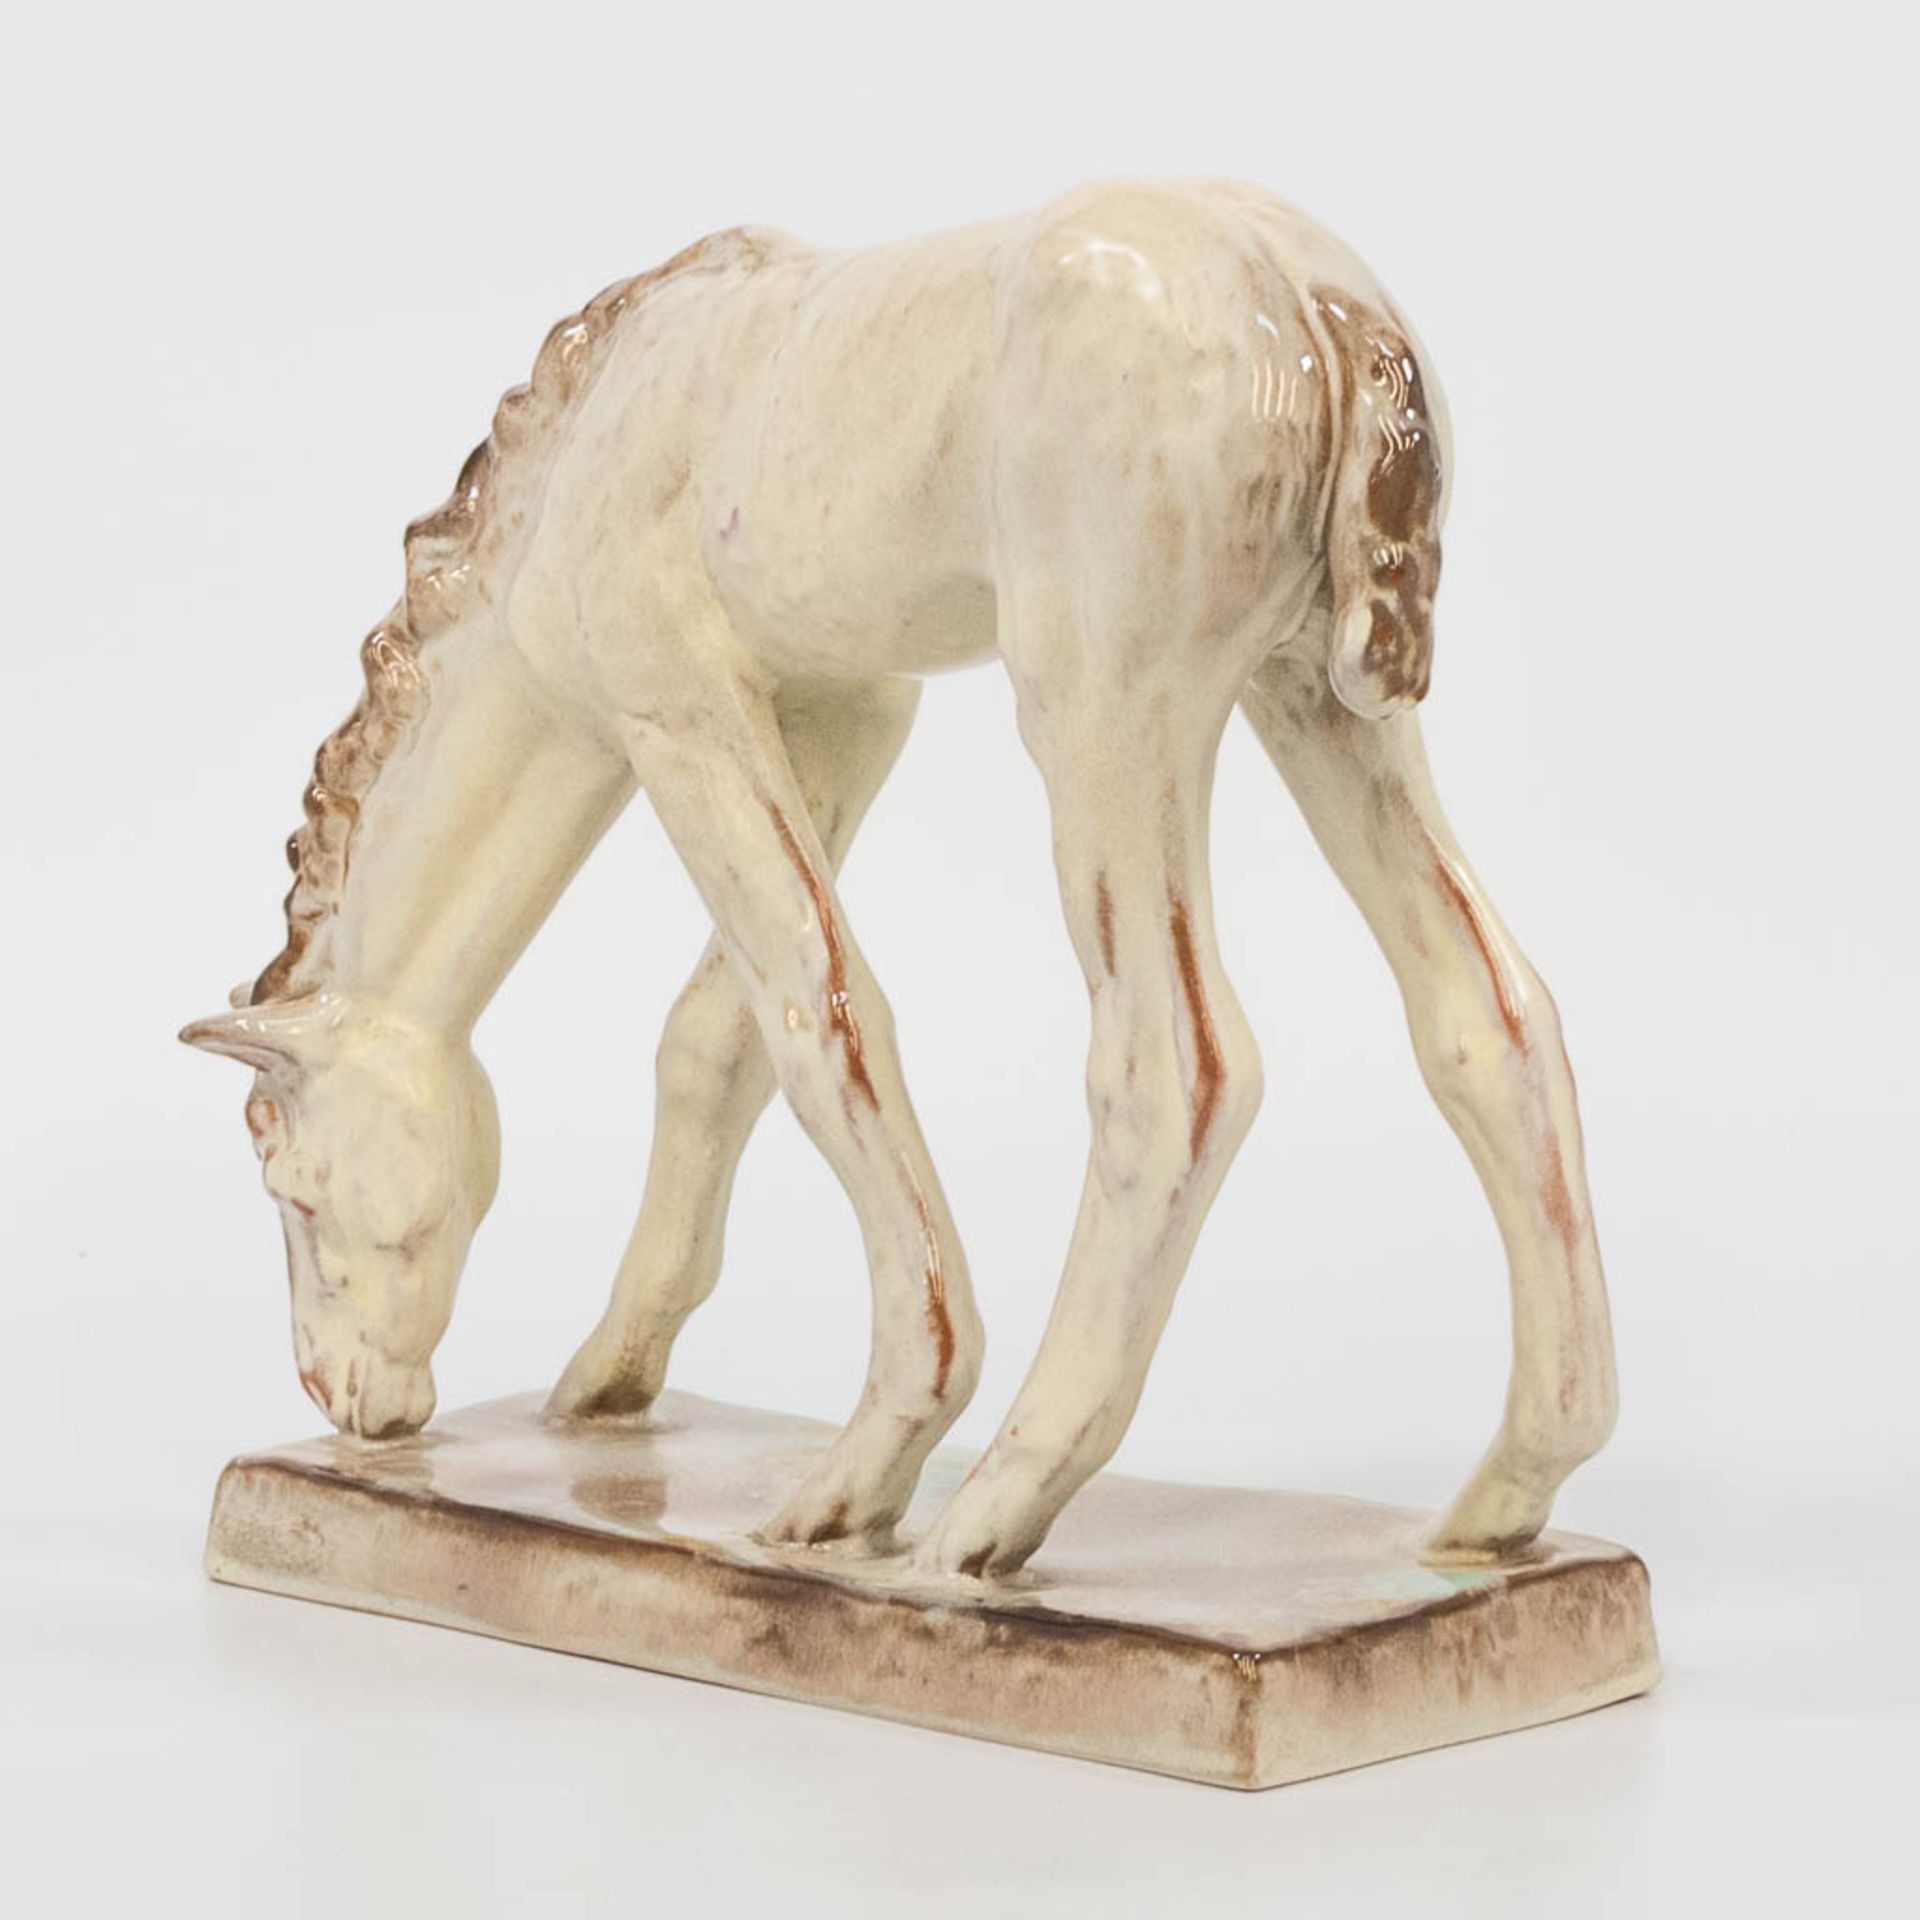 Else BACH (1899-1950) for Karlsruhe Majolica, a statue of a horse. (9 x 23 x 21,5 cm) - Image 4 of 16